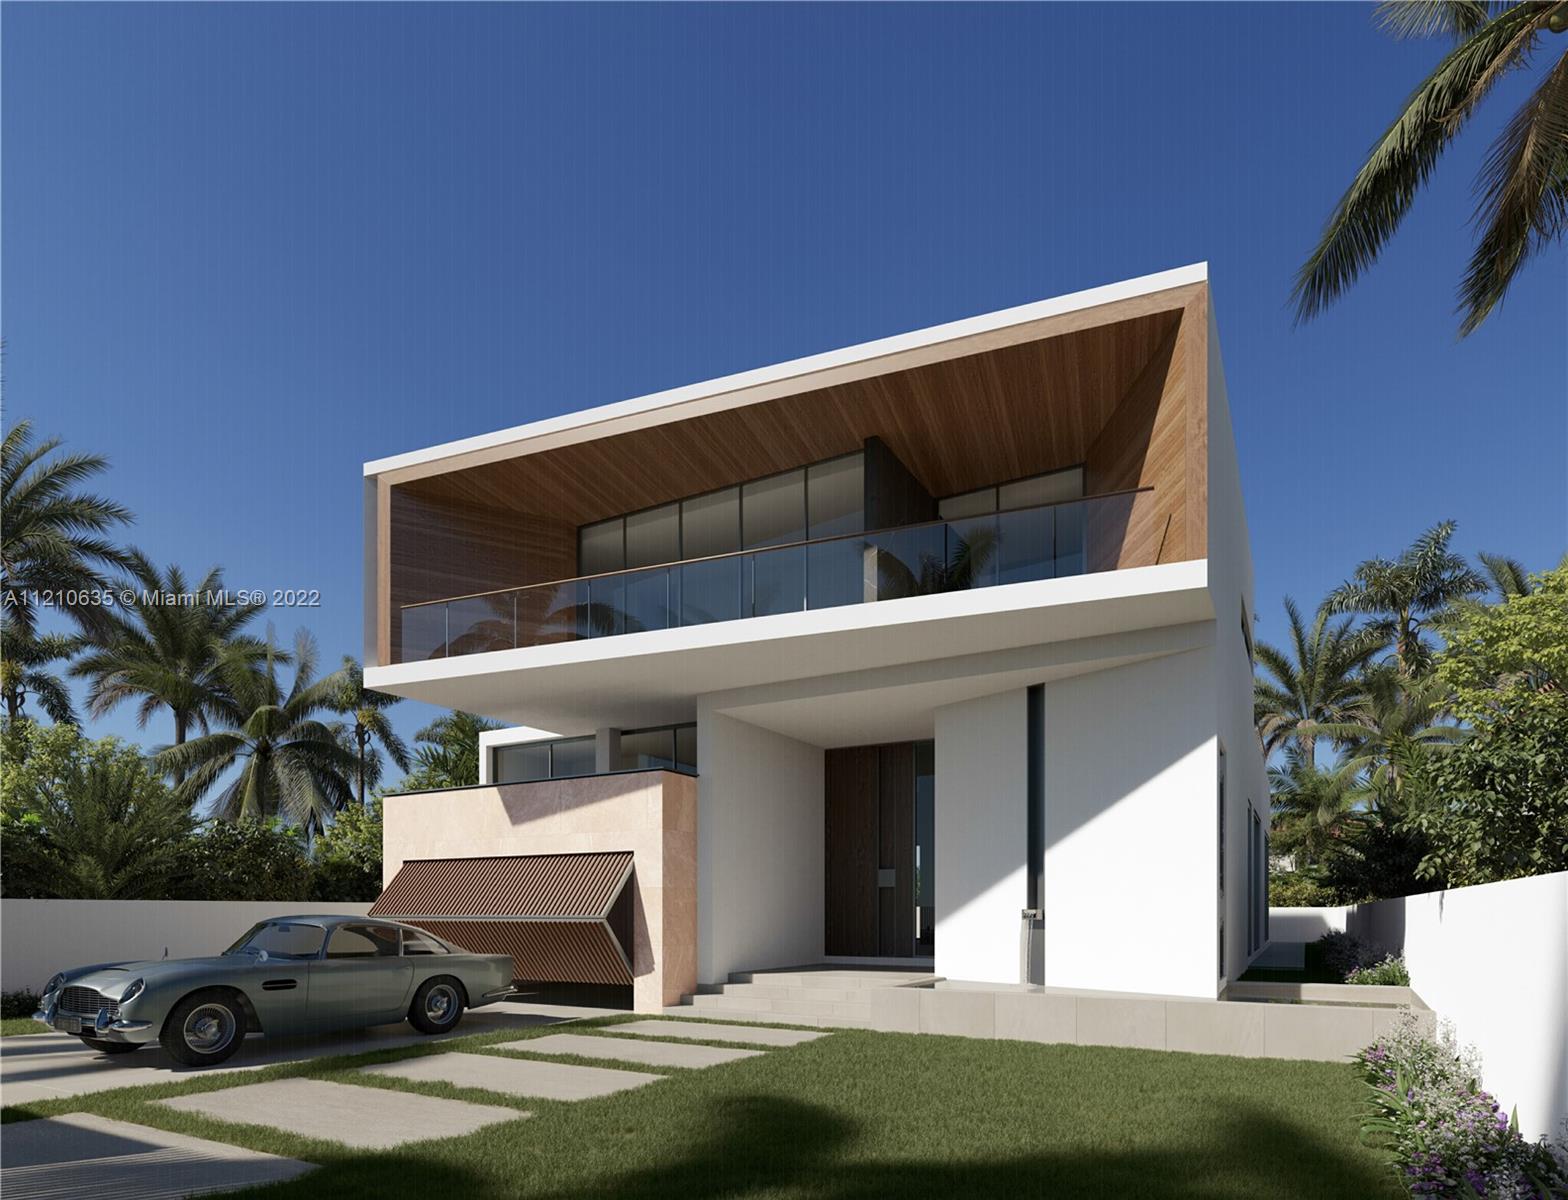 Rare opportunity to live in the Exclusive community of Golden Beach. The project is a unique two-story residence with a pool and access to the private beach of Prestigious Golden Beach. The design is juxtaposed with minimalist geometric forms and rich materials exposed concrete, warm and wood tones with outdoor living areas surrounded by lush landscapes. The price includes the land & the architectural plans designed by DNA, Design & Architecture. The plans are about to be approved . the set of plans includes: 2-story with the ground floor:2,974 SF- second floor :3,055 SF -Total under AC:6,029 SF Total Heigh : 26' ft with pool. Seller's financing Available.
Access Private Beach, tennis & basketball courts, parks, City halls, Private police force. Most desirable location in Miami.